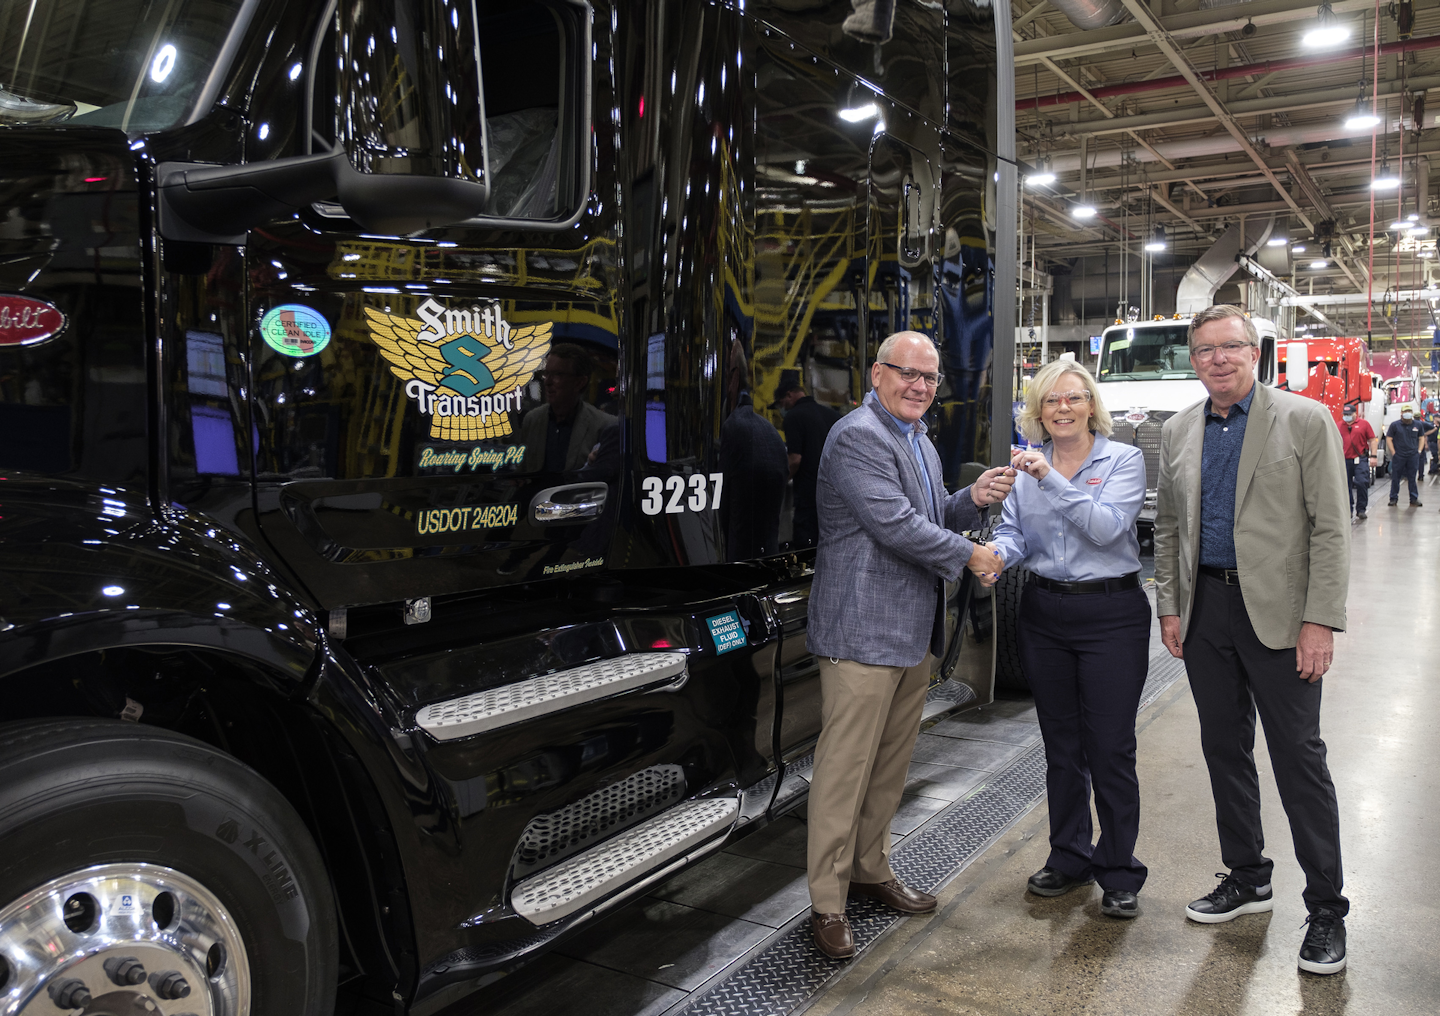 Starting in 2019, Smith Transport rolled out a new video-based driver safety platform across the company’s 900-truck fleet.